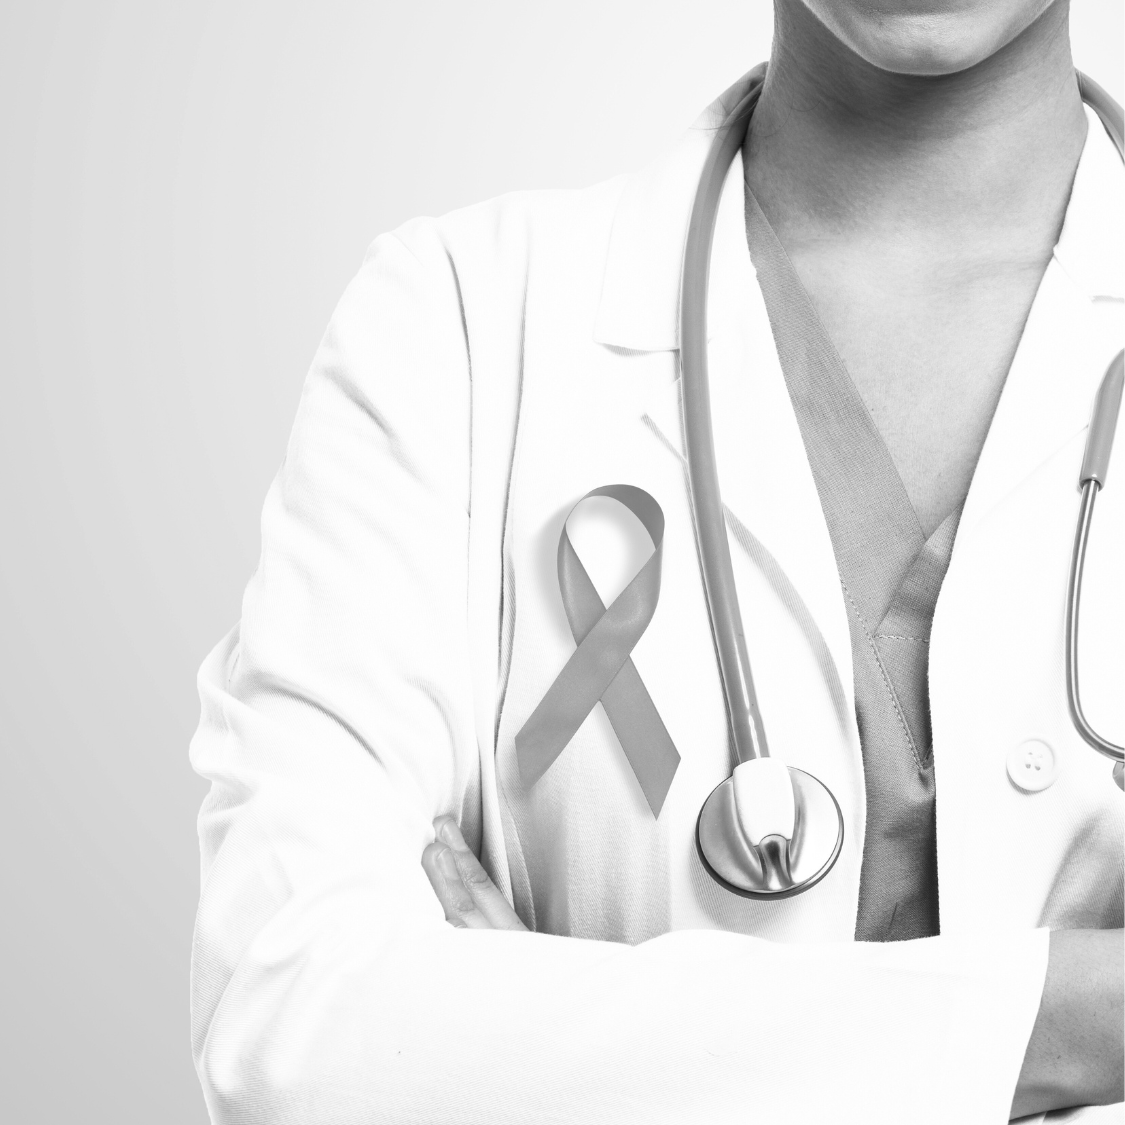 Breast Cancer screening can save lives with early detection